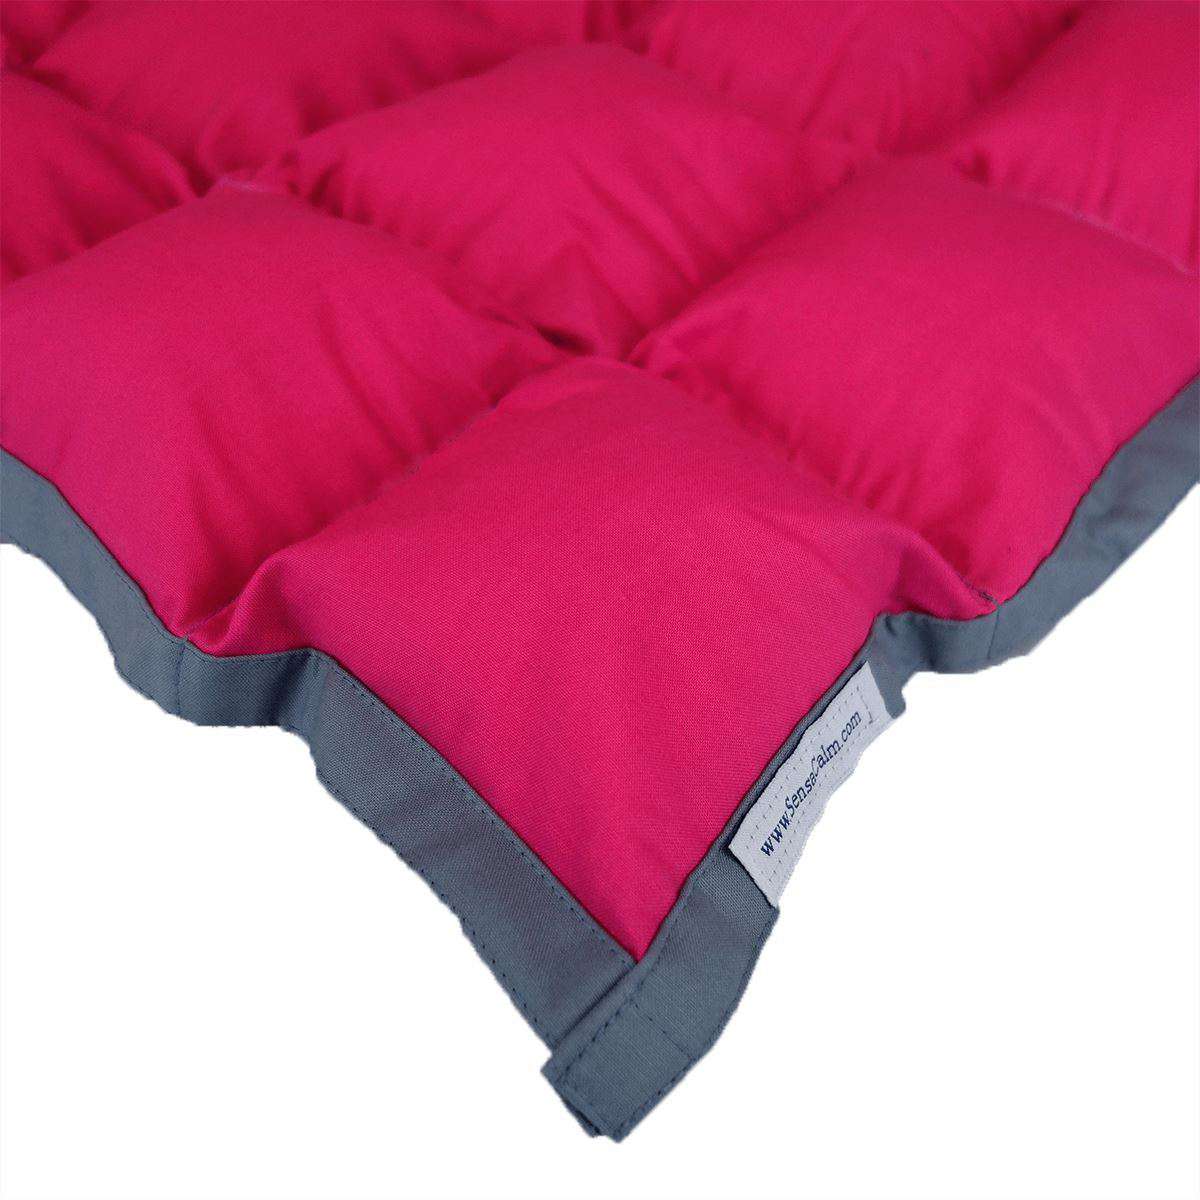 SensaCalm Clearance Weighted Blanket - Small 7 lb Raspberry and Volcanic Gray (for 60 lb user) MULTIPLES AVAILABLE Clearance Weighted Blanket